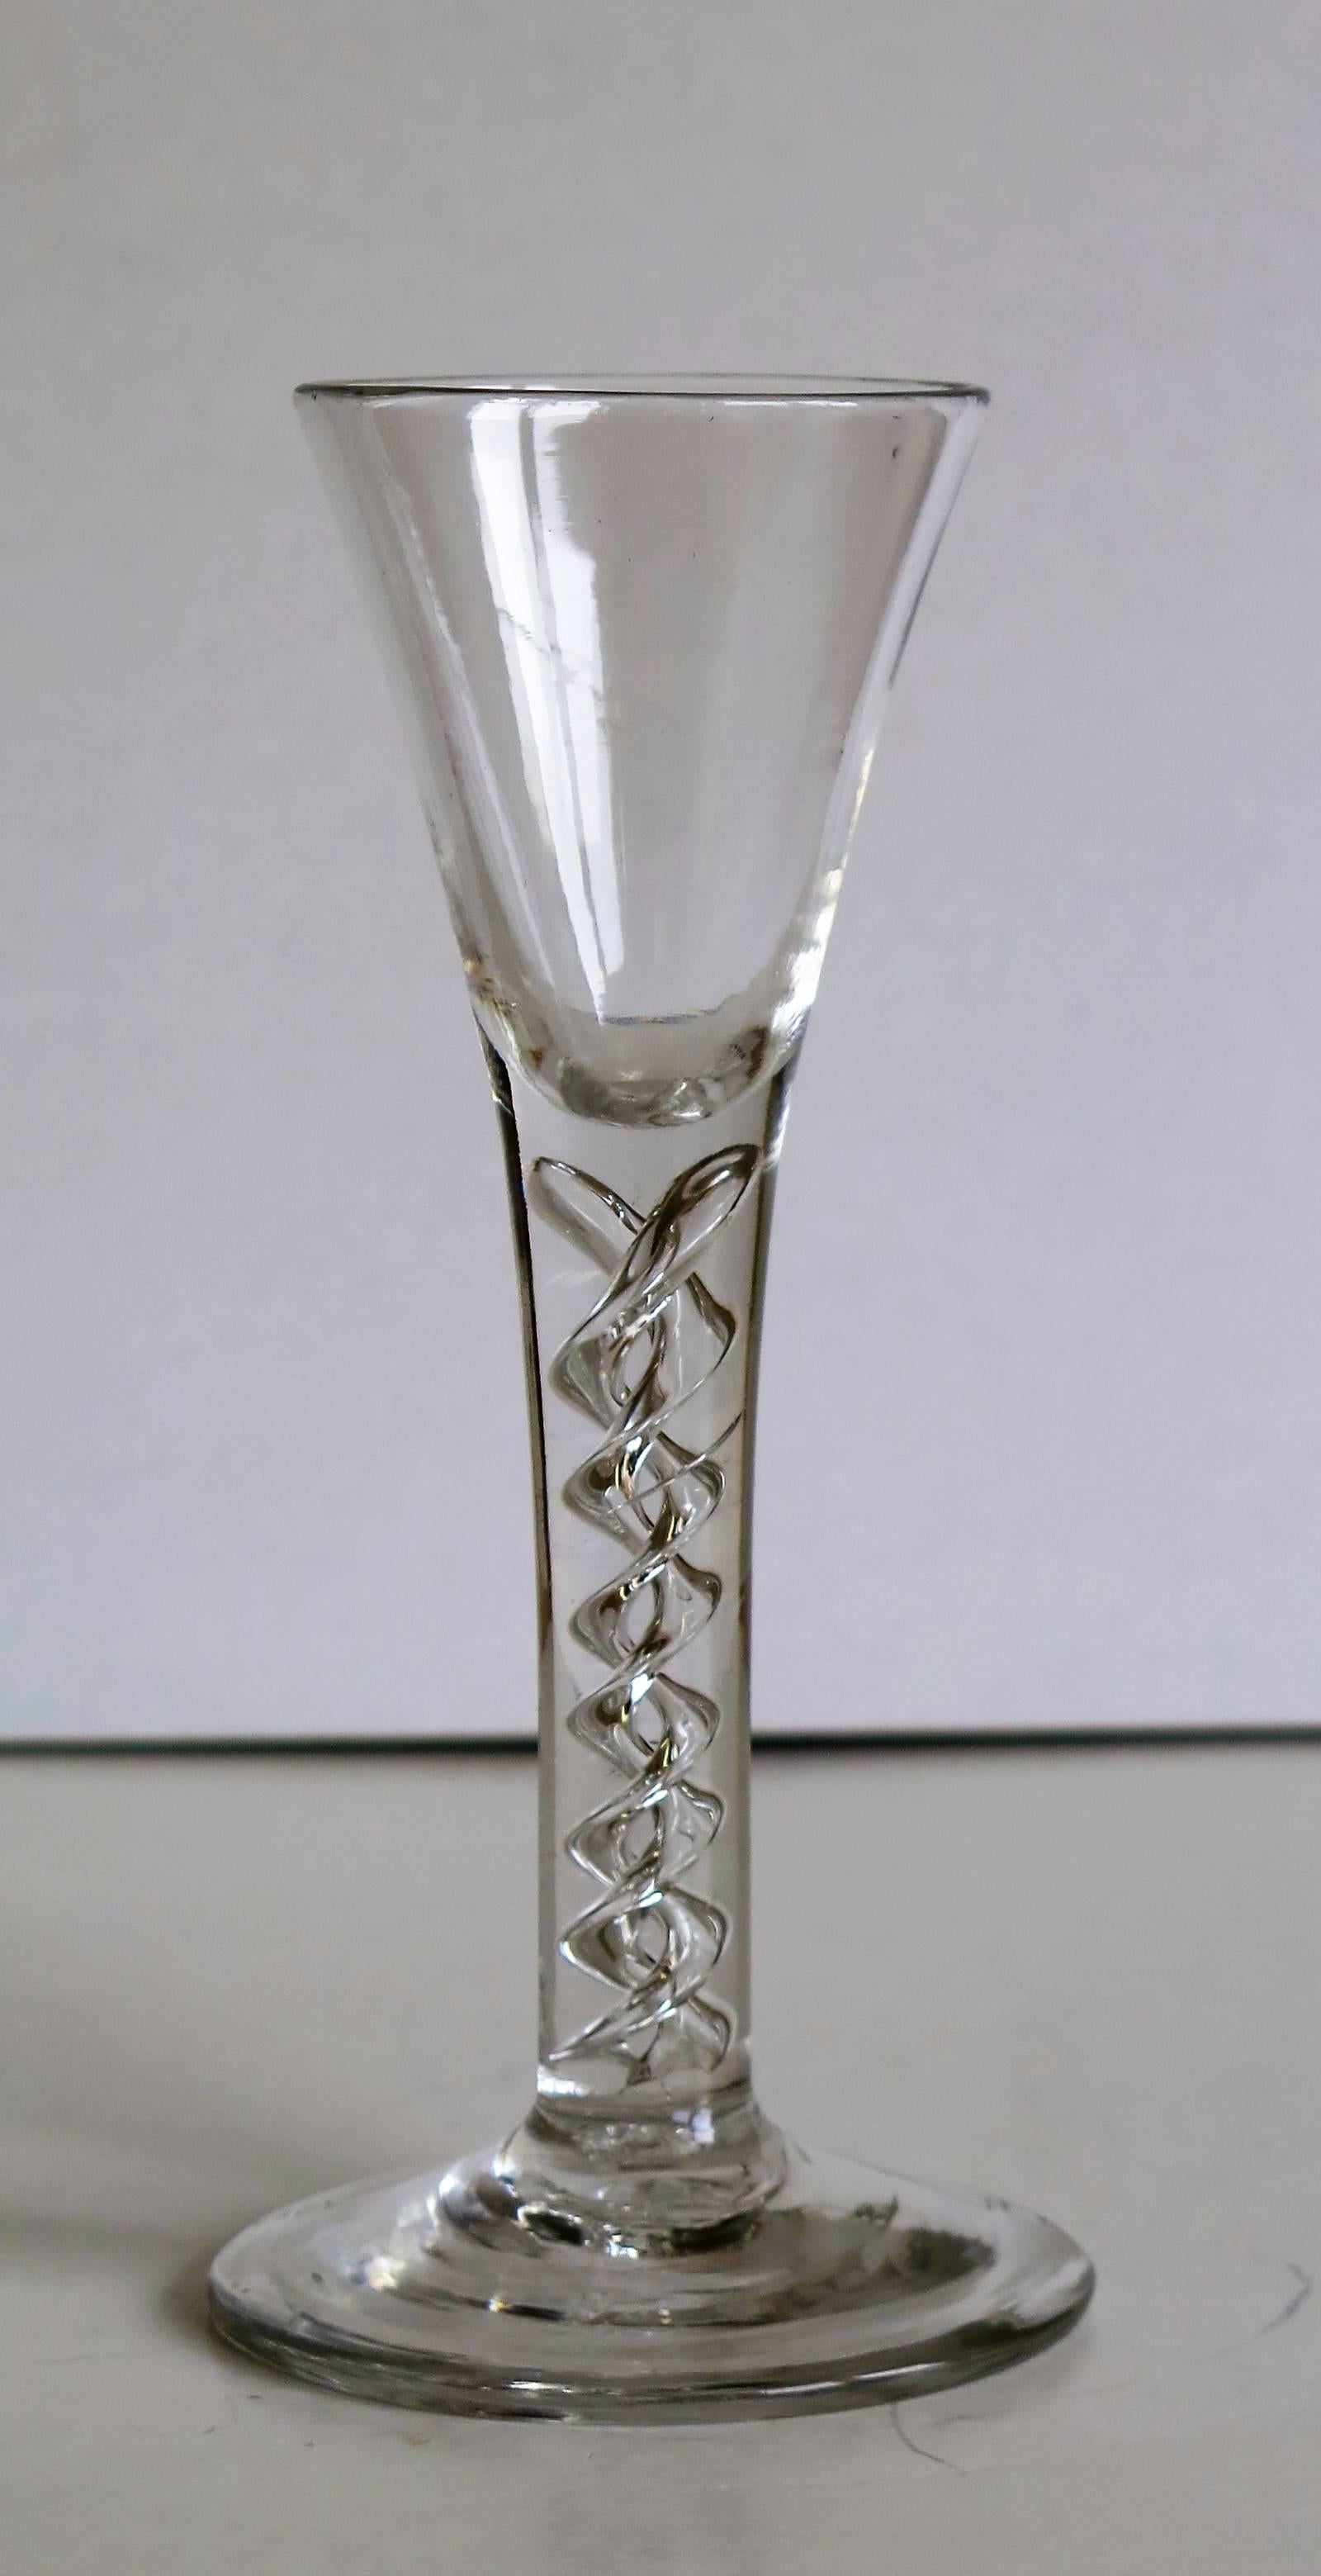 This is a superb English, Georgian, handblown, wine drinking glass, with a 'Mercury' Air Twist stem, dating to the middle of the 18th century, circa 1750. 

These glasses are very collectable.

It is handmade from English lead glass which is